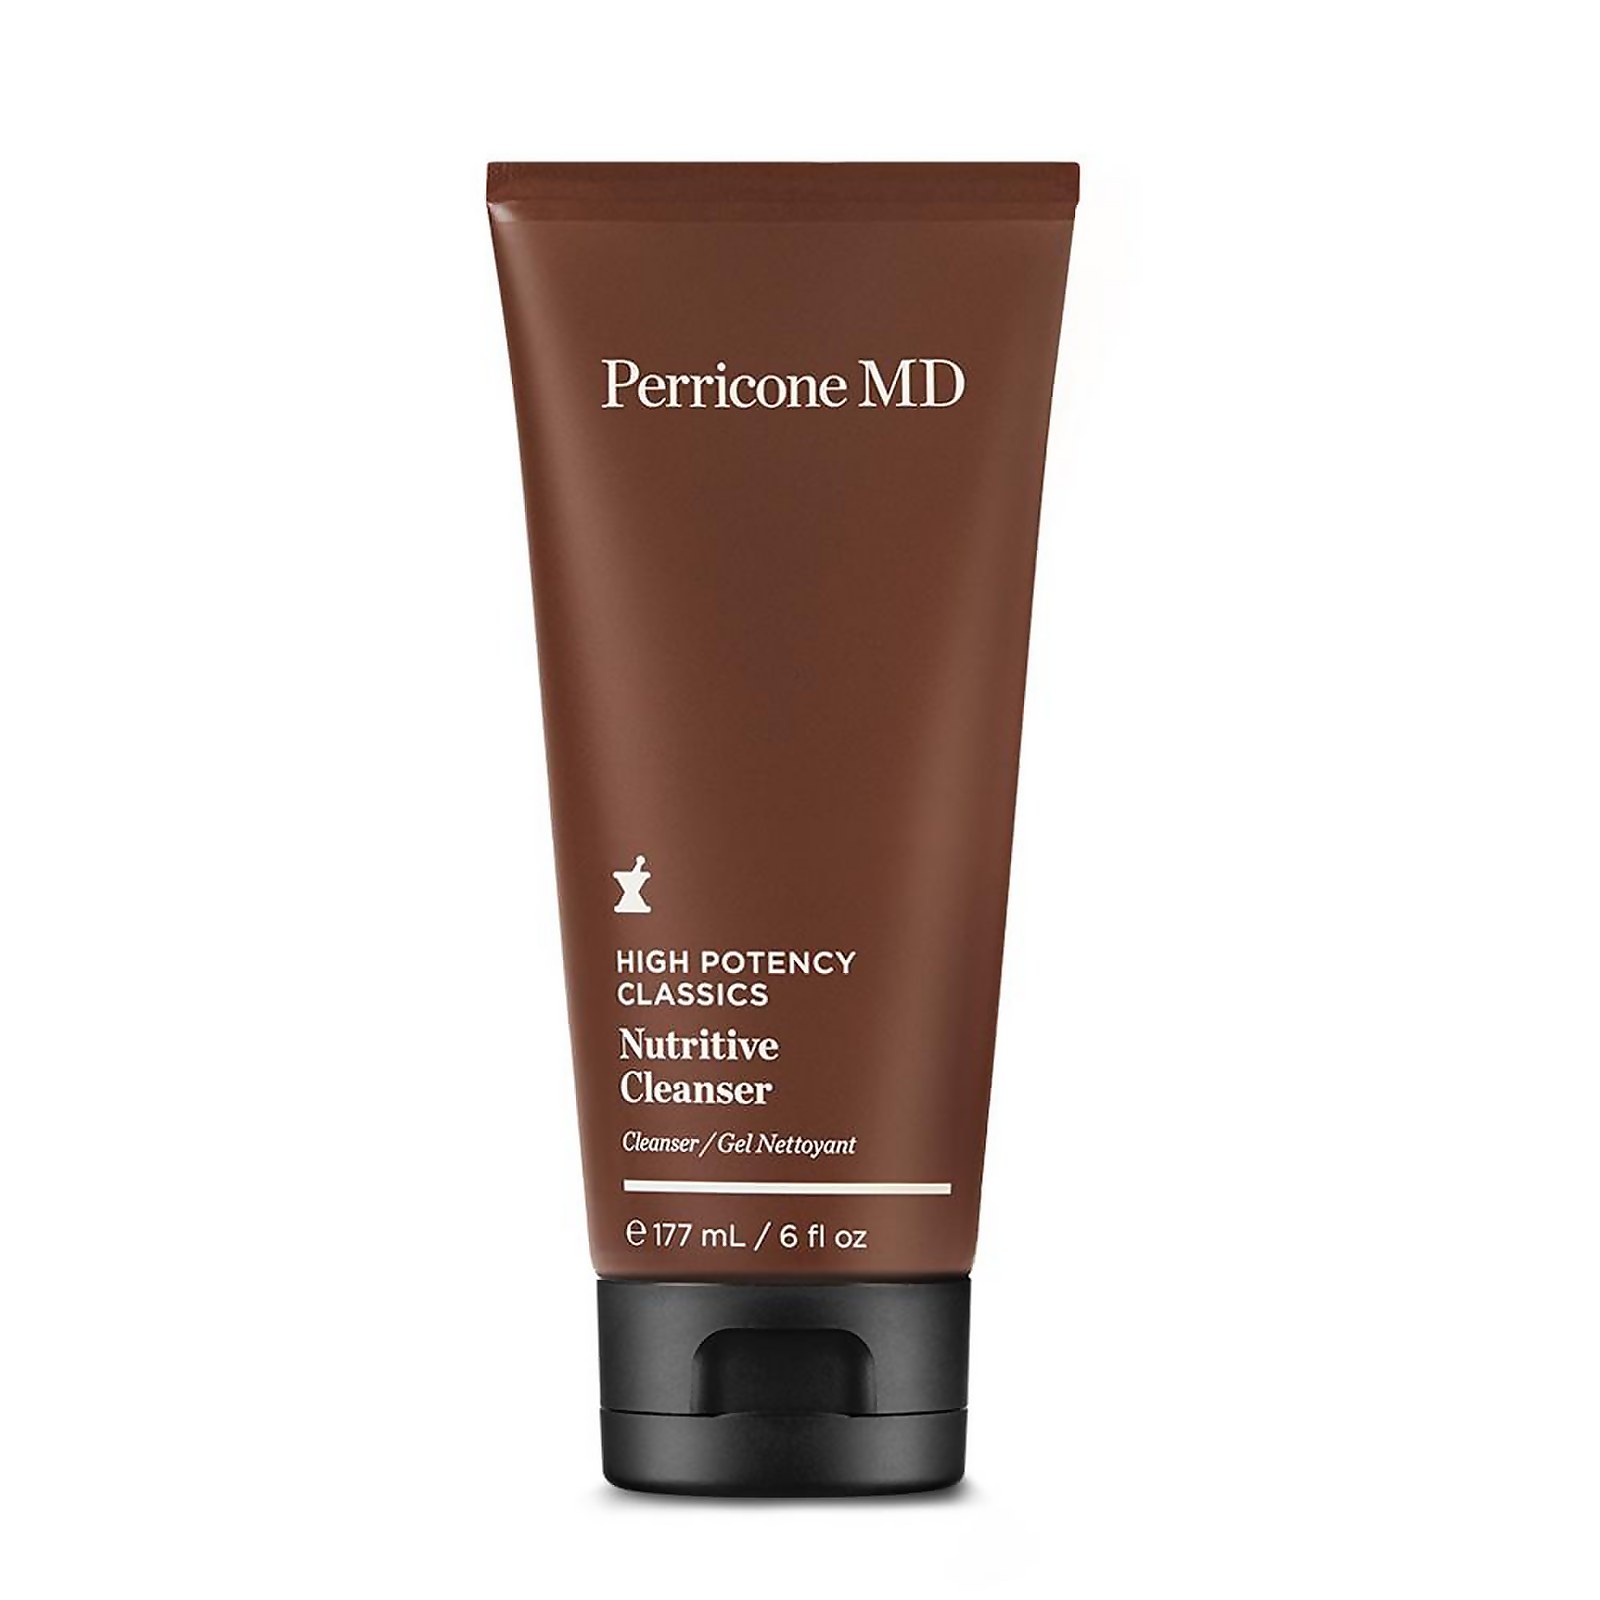 Perricone MD High Potency Classics Nutritive Cleanser - 177ml